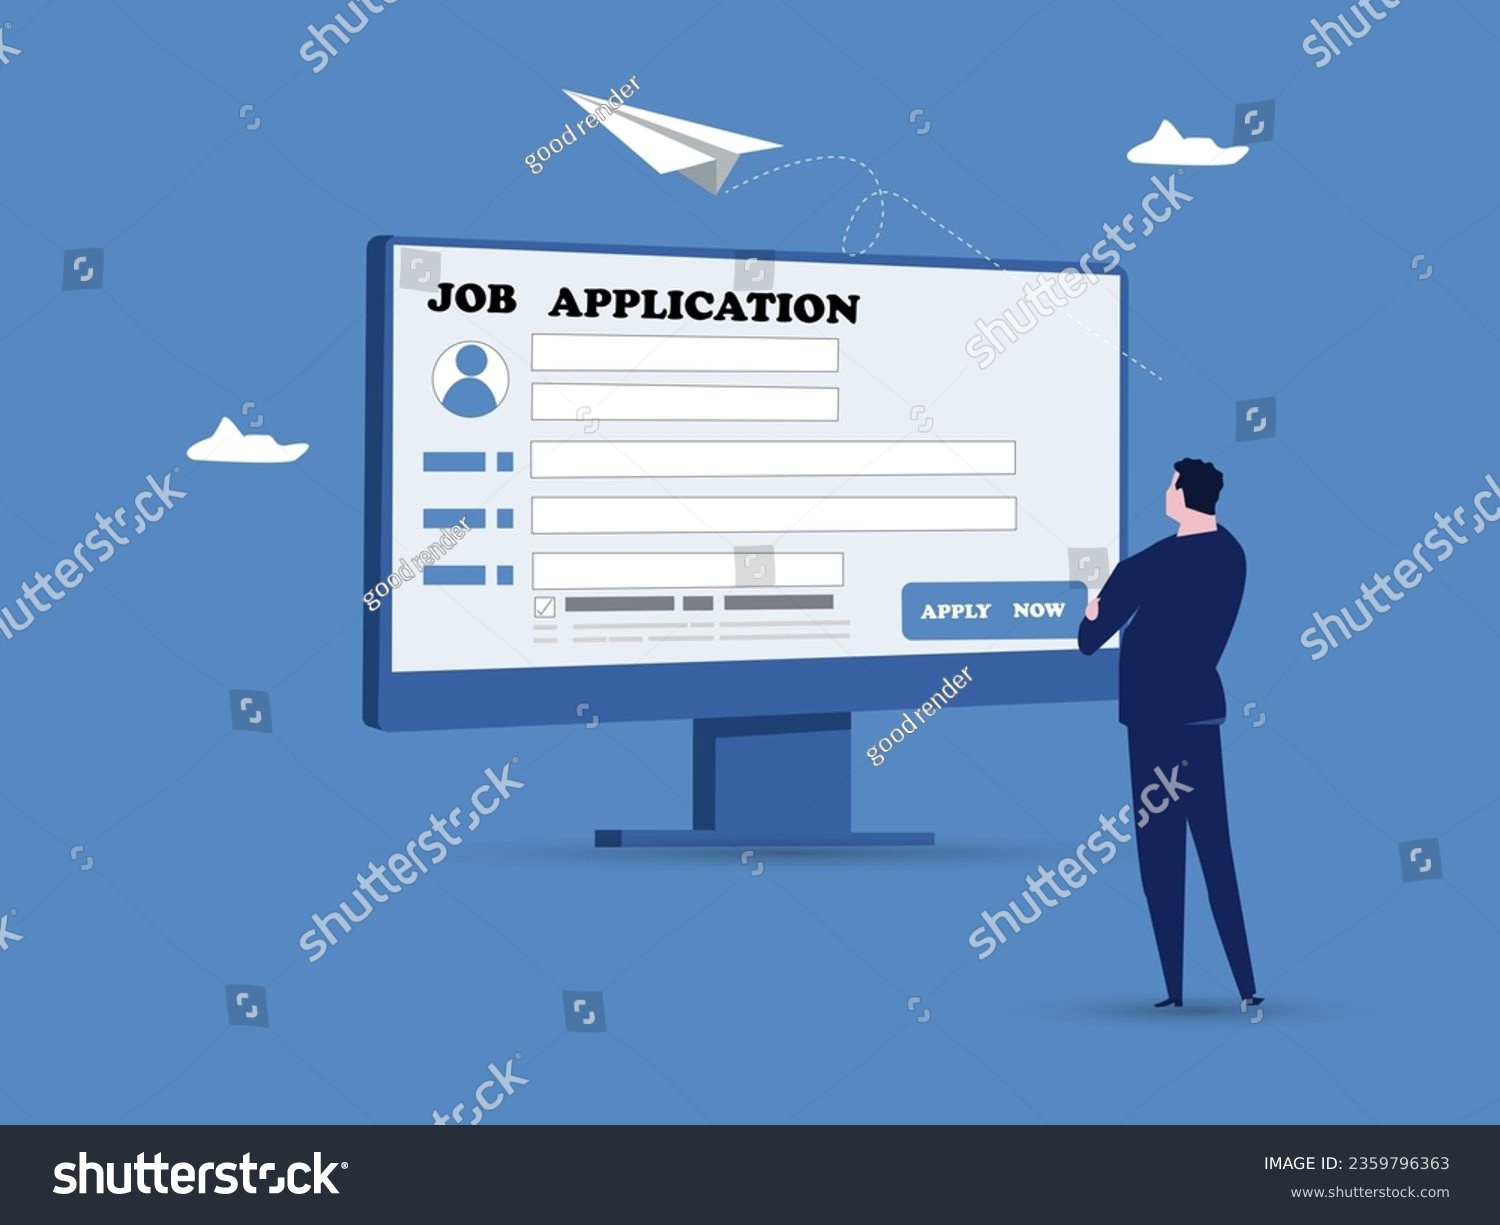 SVG of Businessman hold pencil fill in computer job application form.Online job application, career or employment submission form, candidate recruitment, job search or resume and CV document upload concept. svg